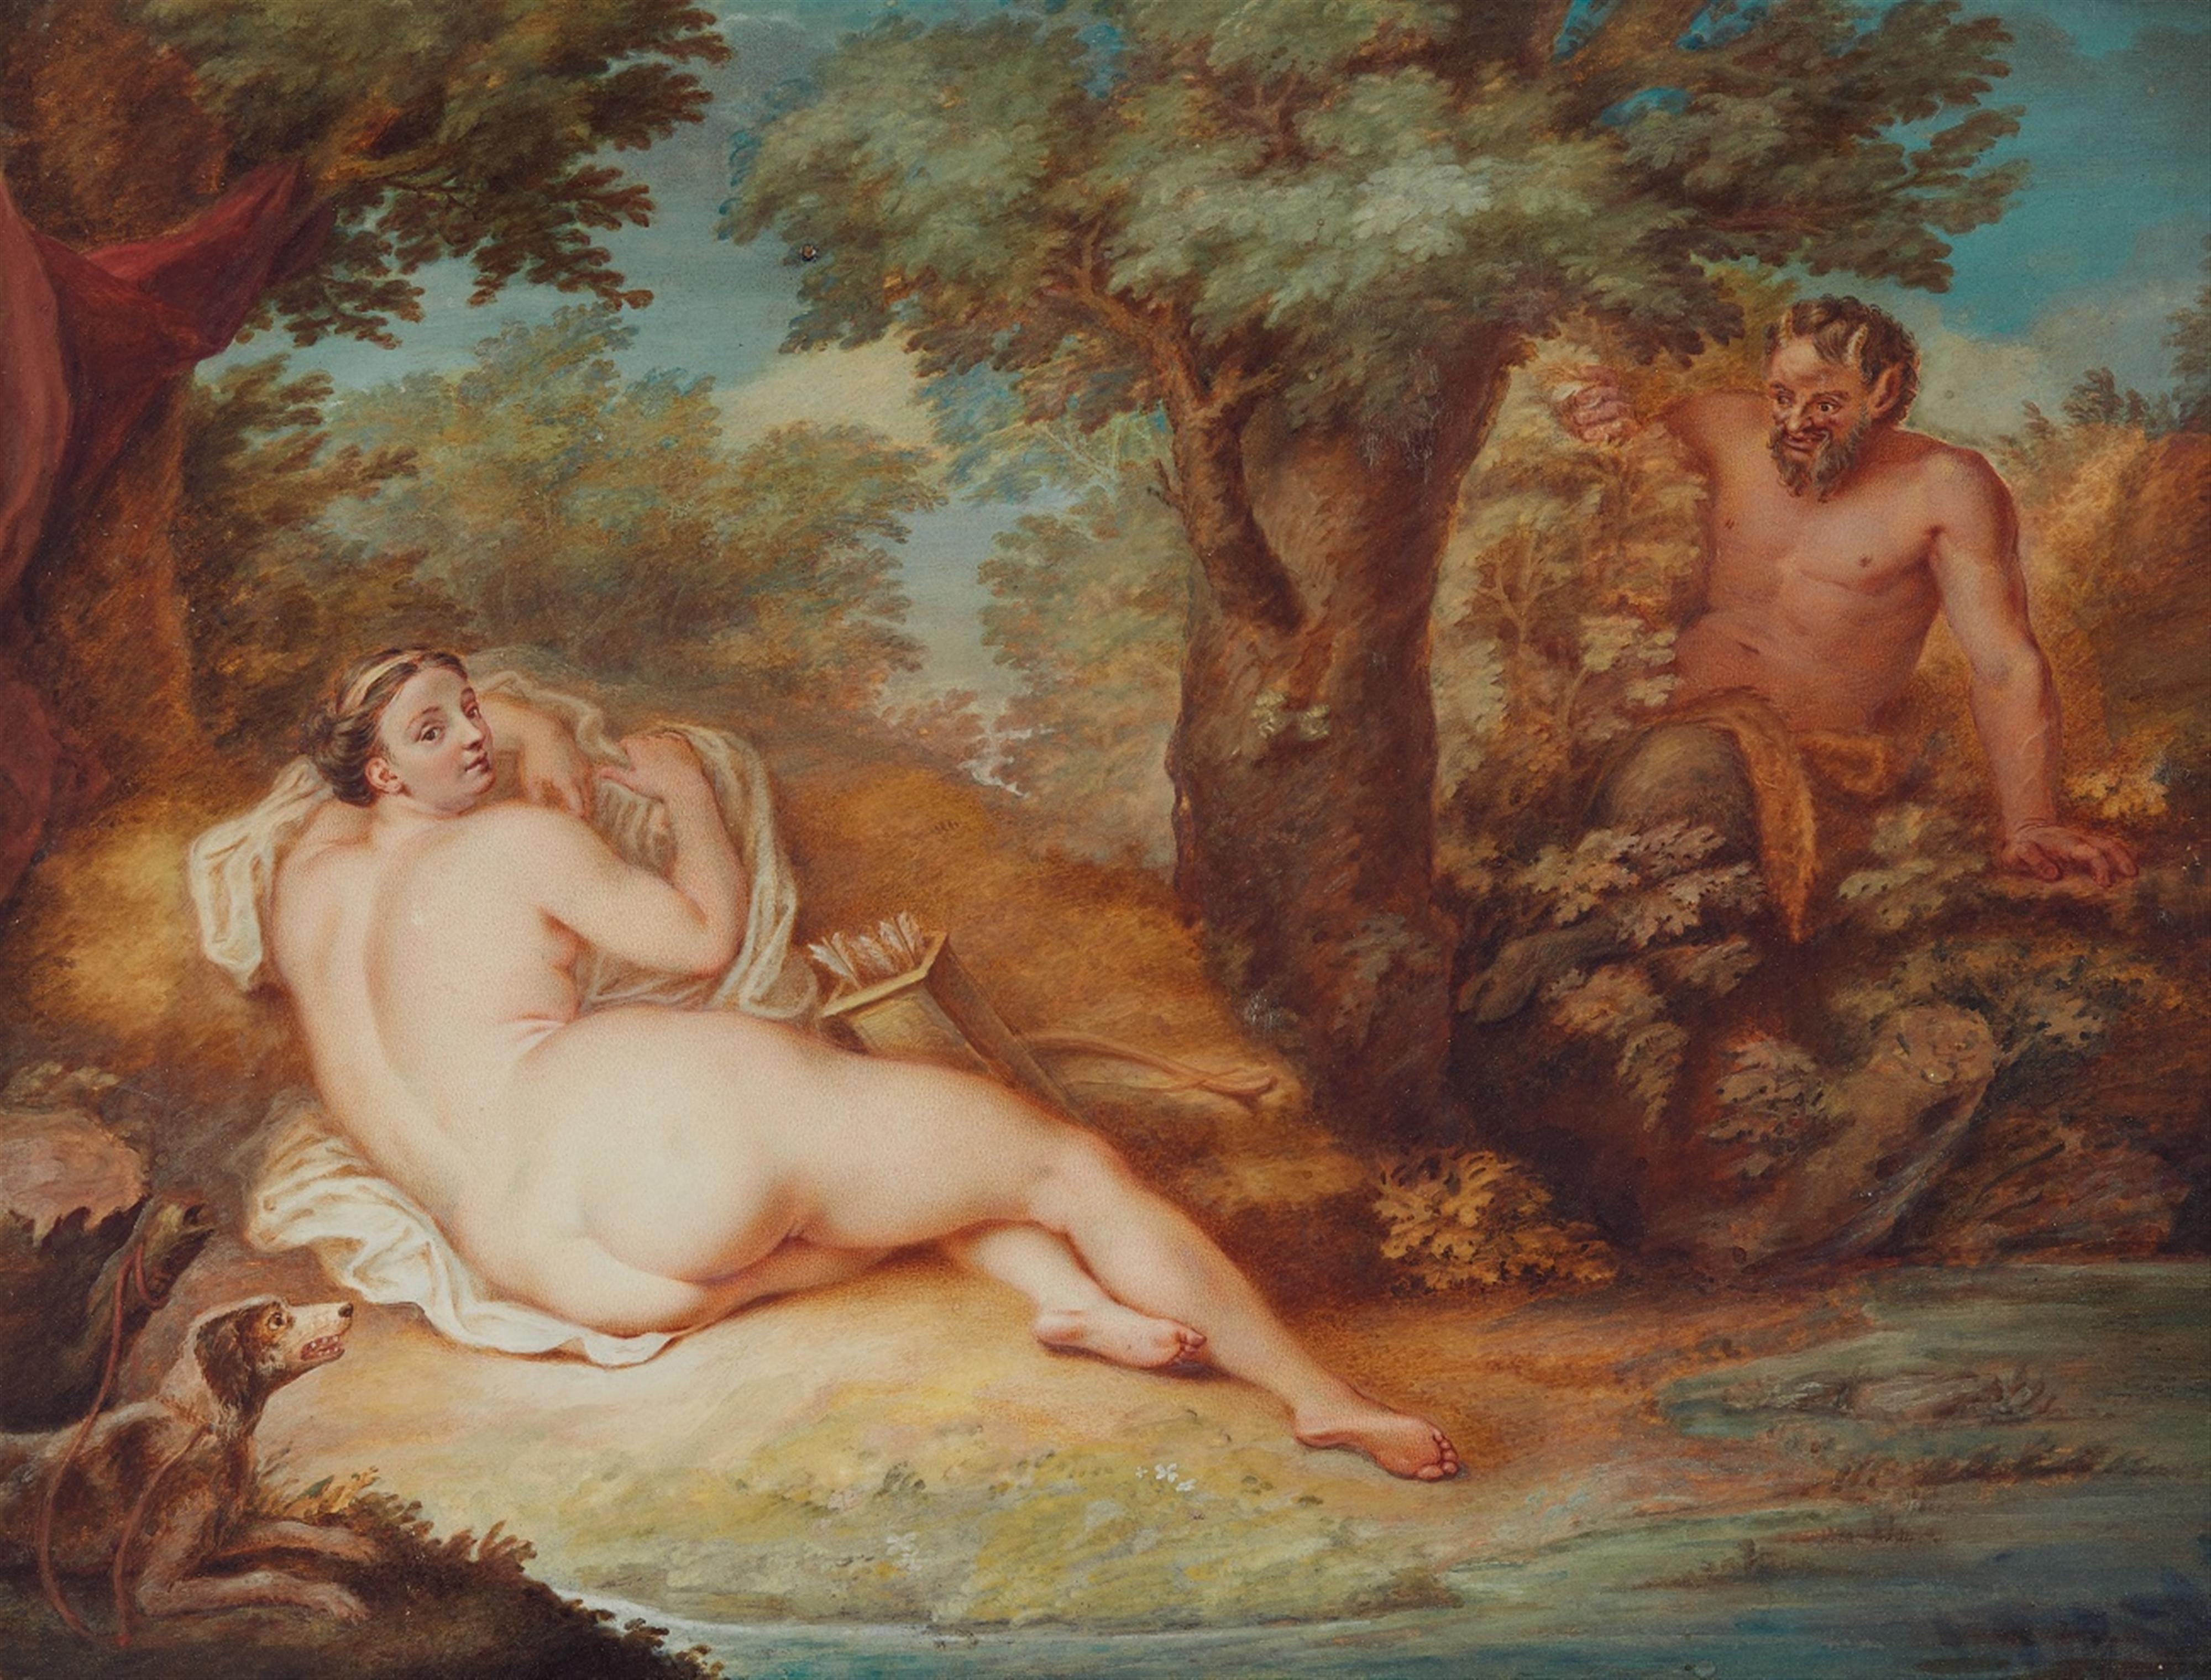 French school 18th century - Satyr and Nymph.